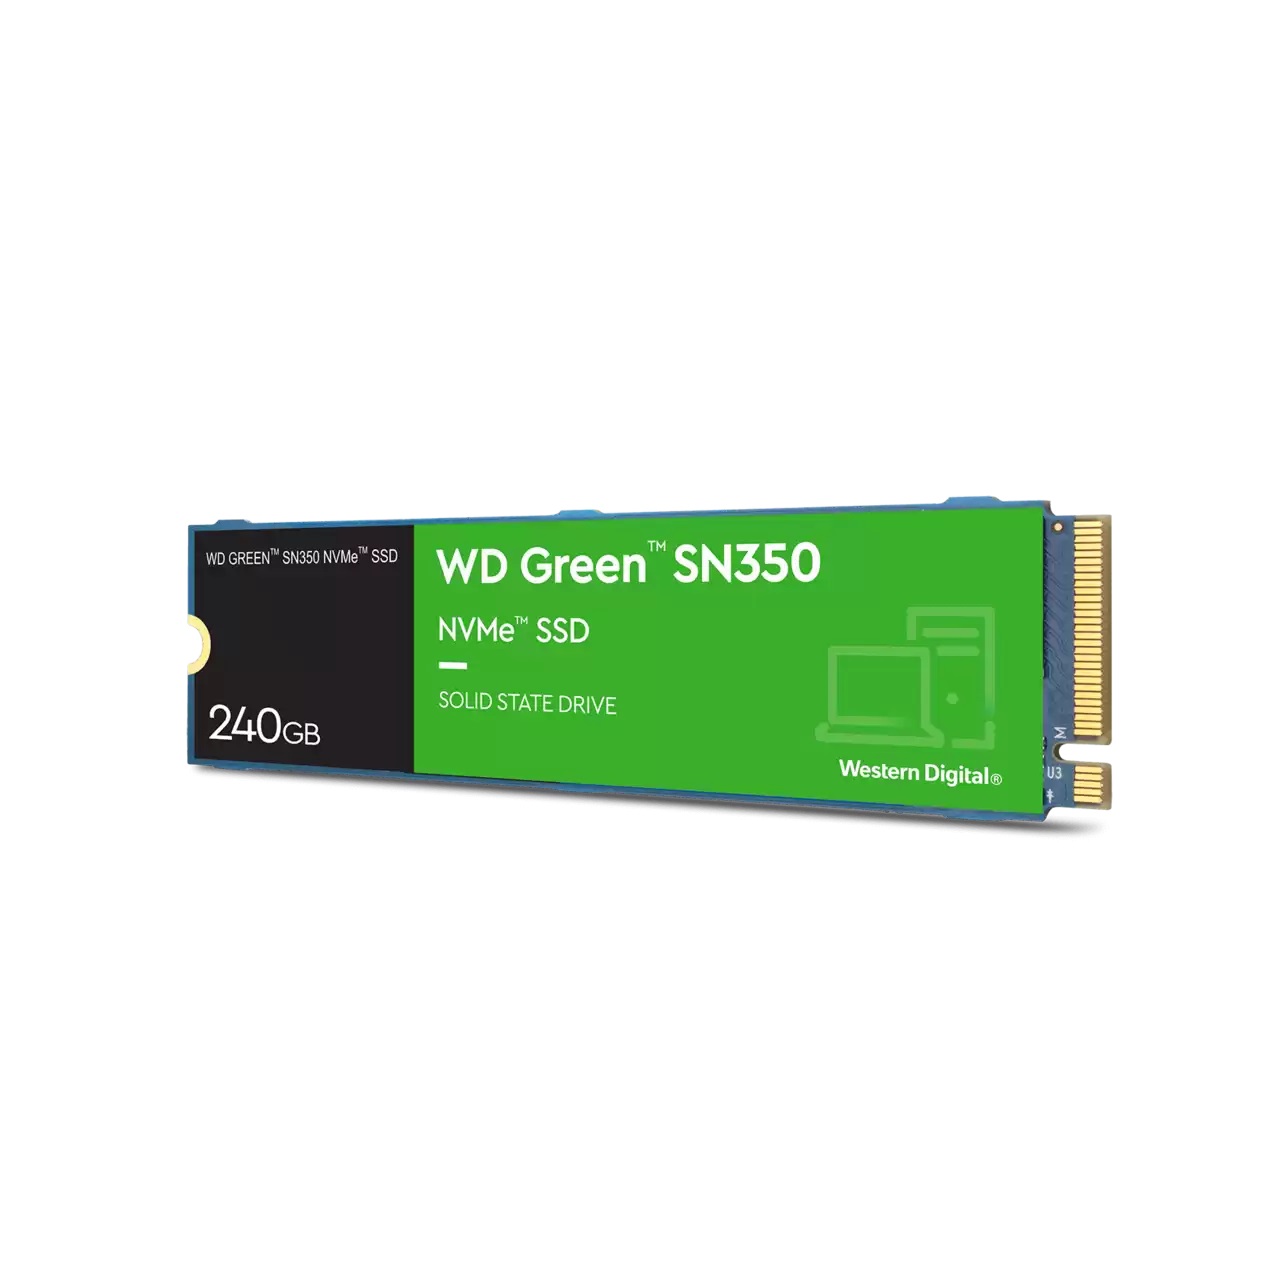 Western Digital WD Blue SN350 240G NVMe SSD 2400MB/s 900MB/s R/W 40TBW 160/150K IOPS M.2 2280 PCIe Gen 4 1mil hrs MTBF - Click Image to Close